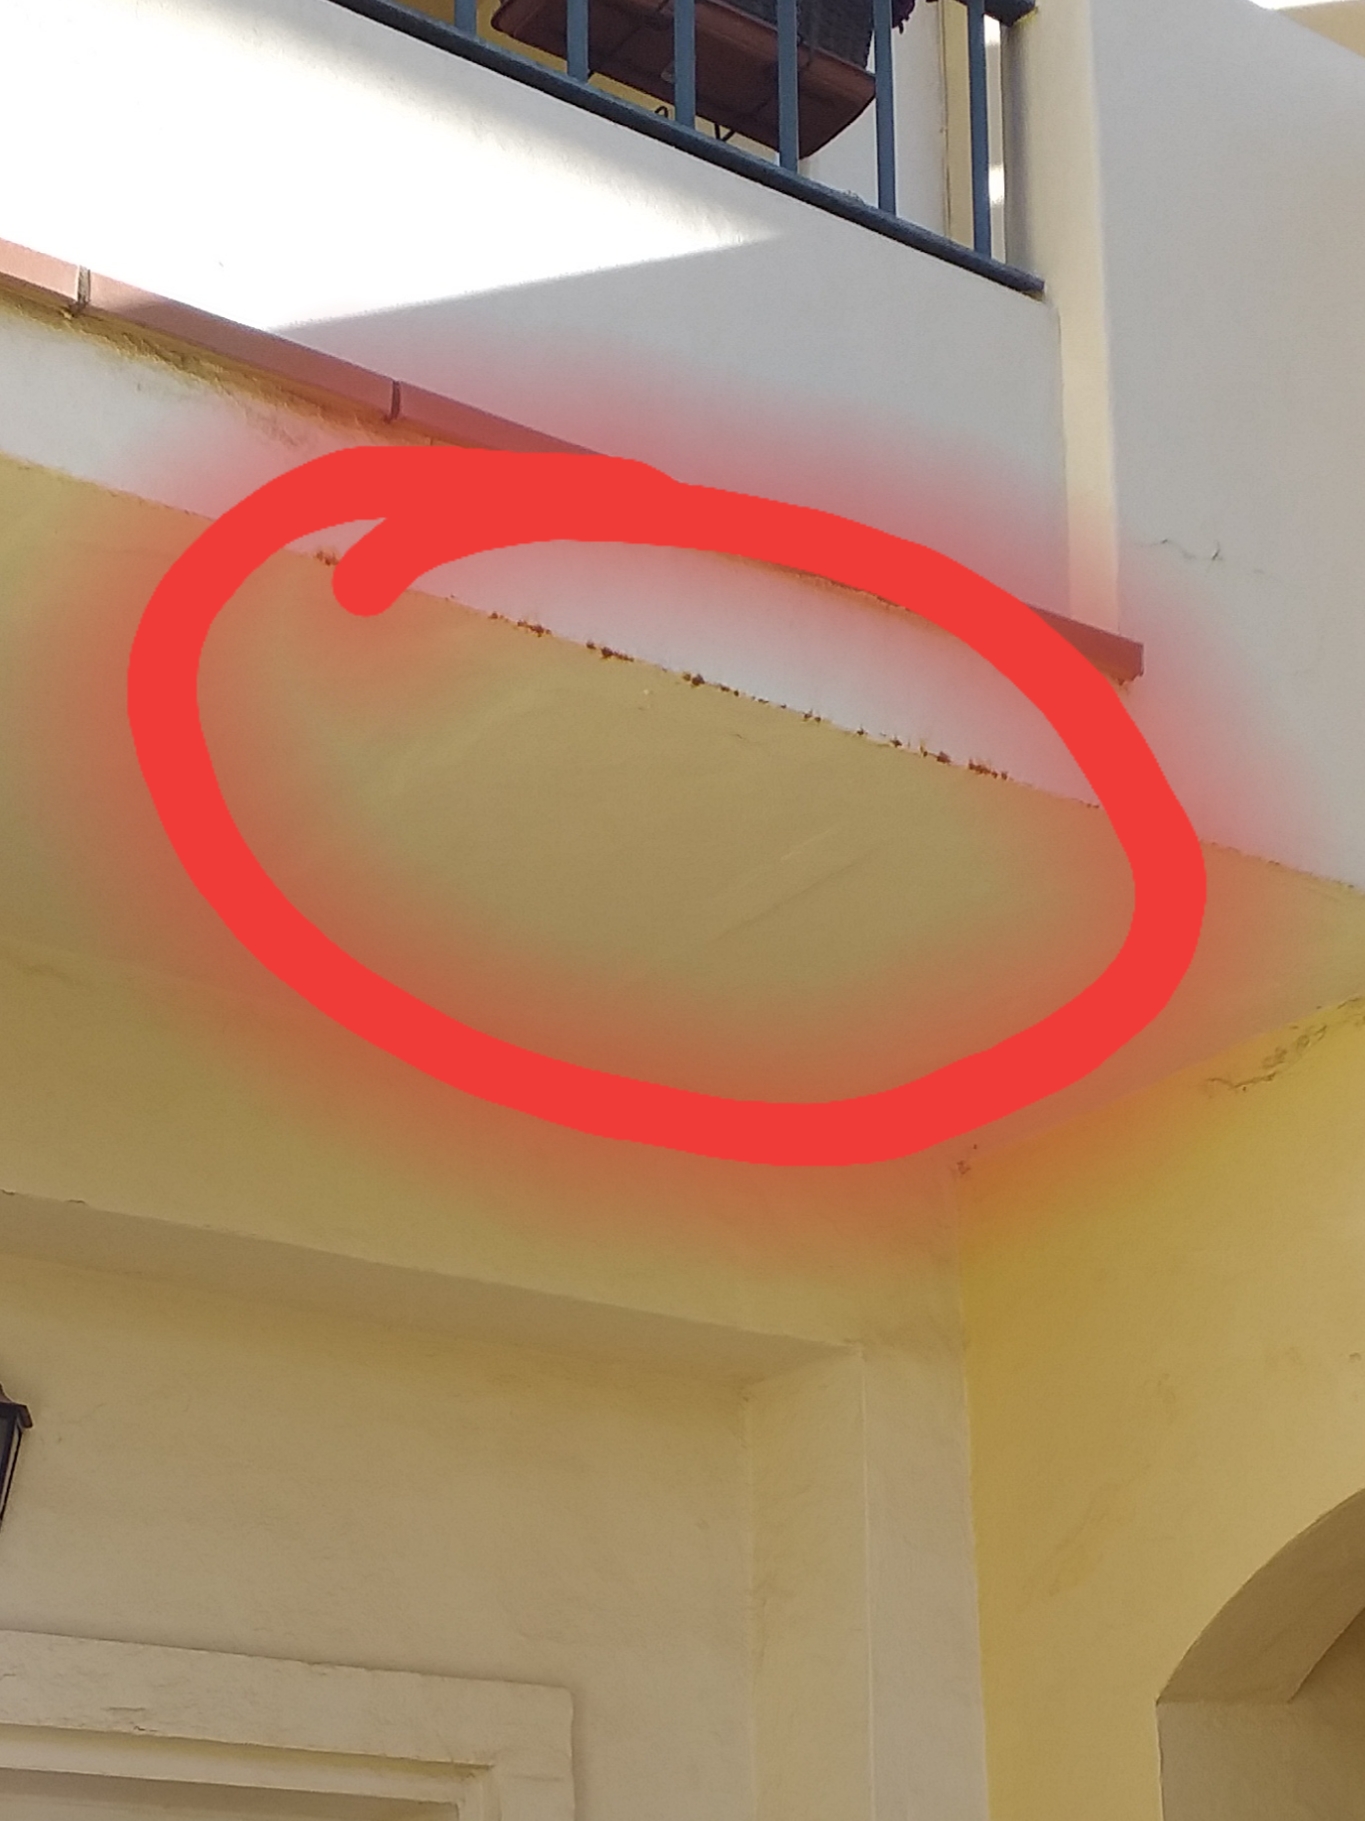 Can anyone recommend: Builder to find and repair source of leak on terrace.